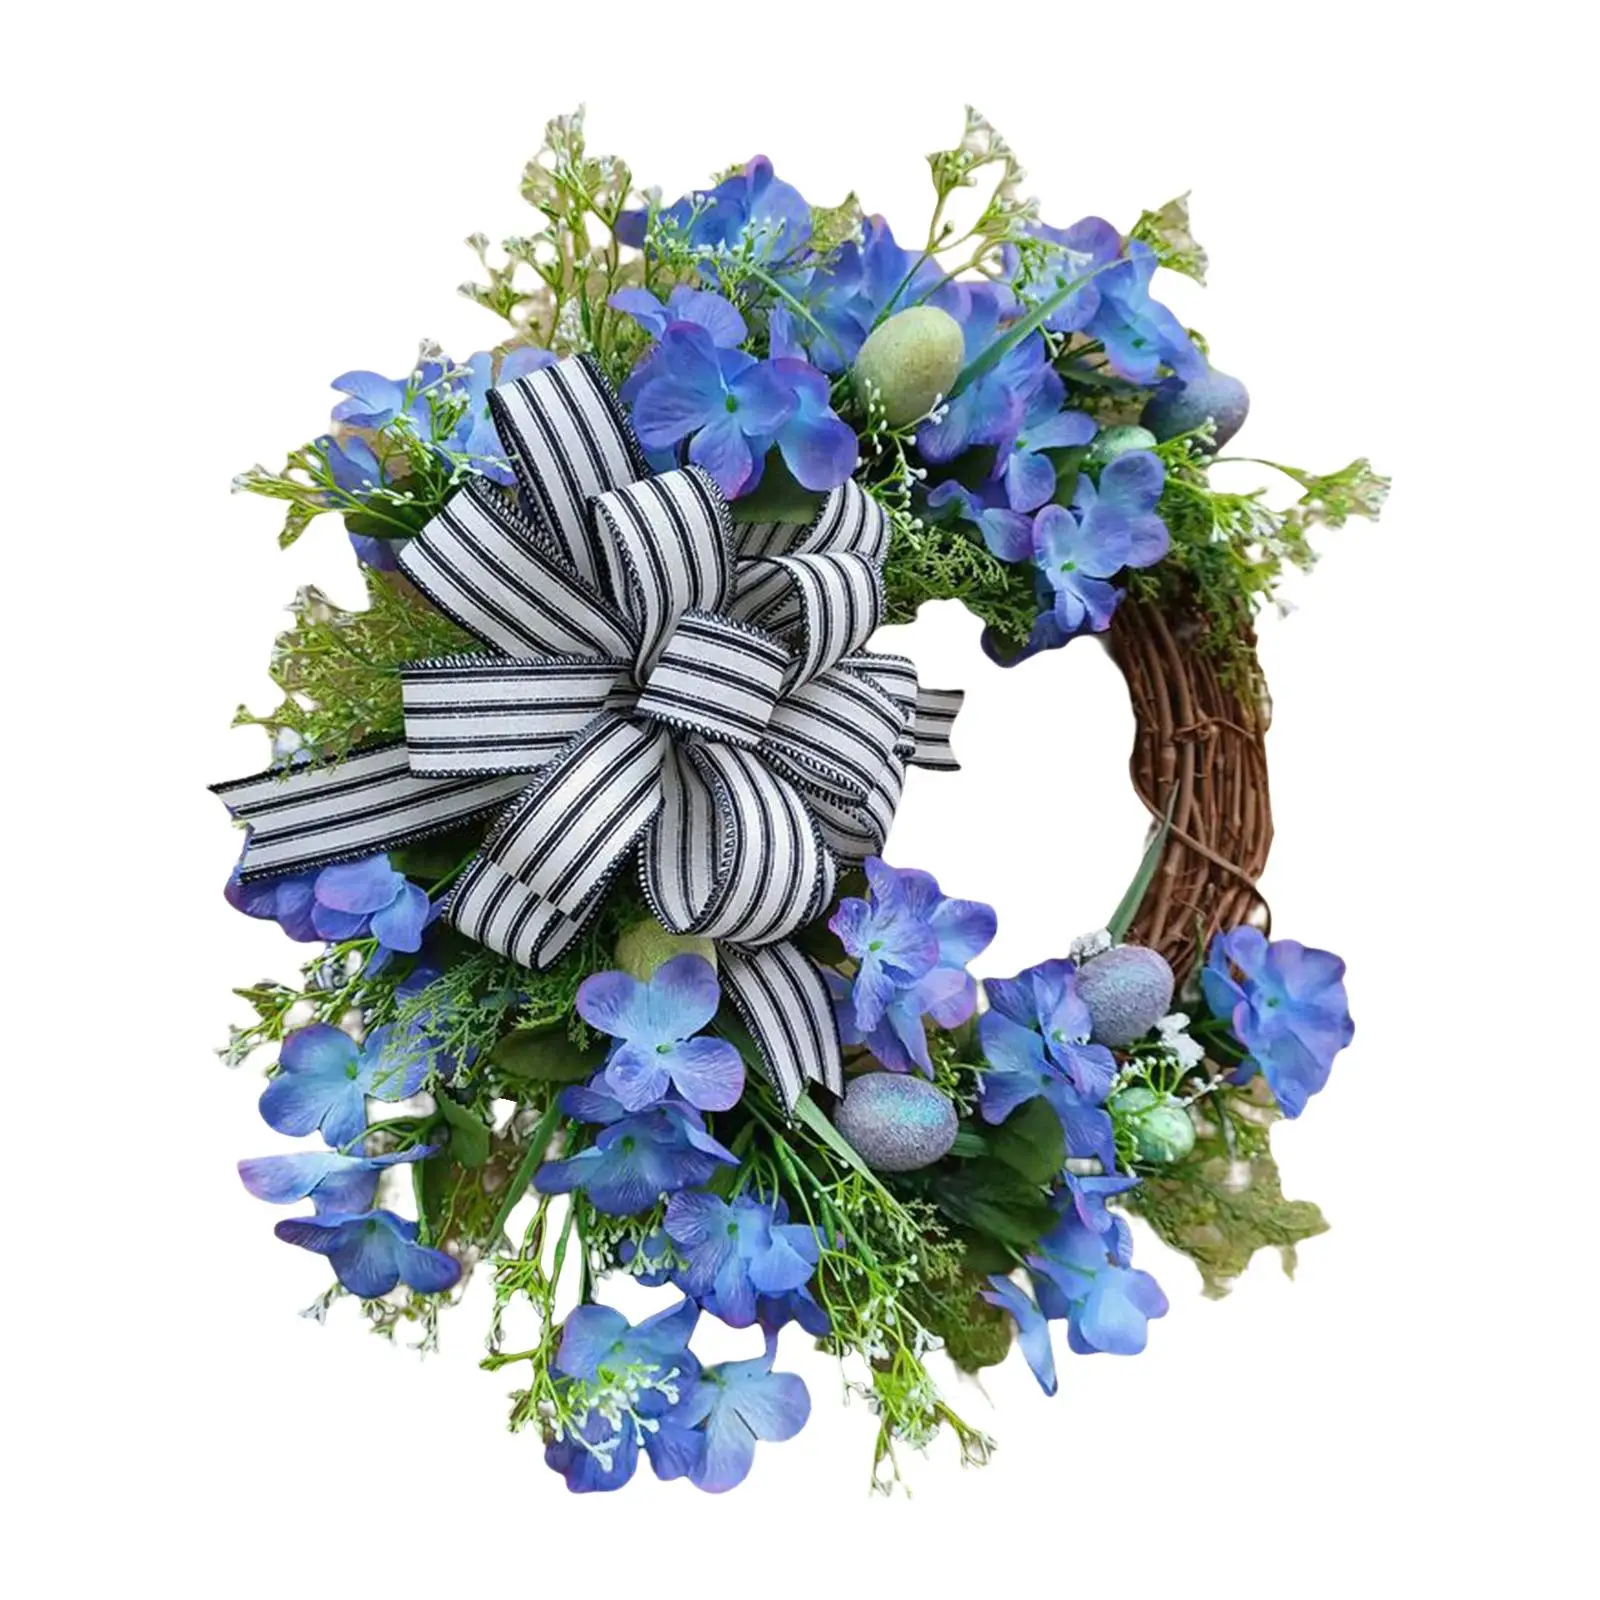 45cm Easter Egg Wreath Garland Artificial Flower Leaf Wreaths Pendants for Holiday Farmhouse Porch Home Decoration